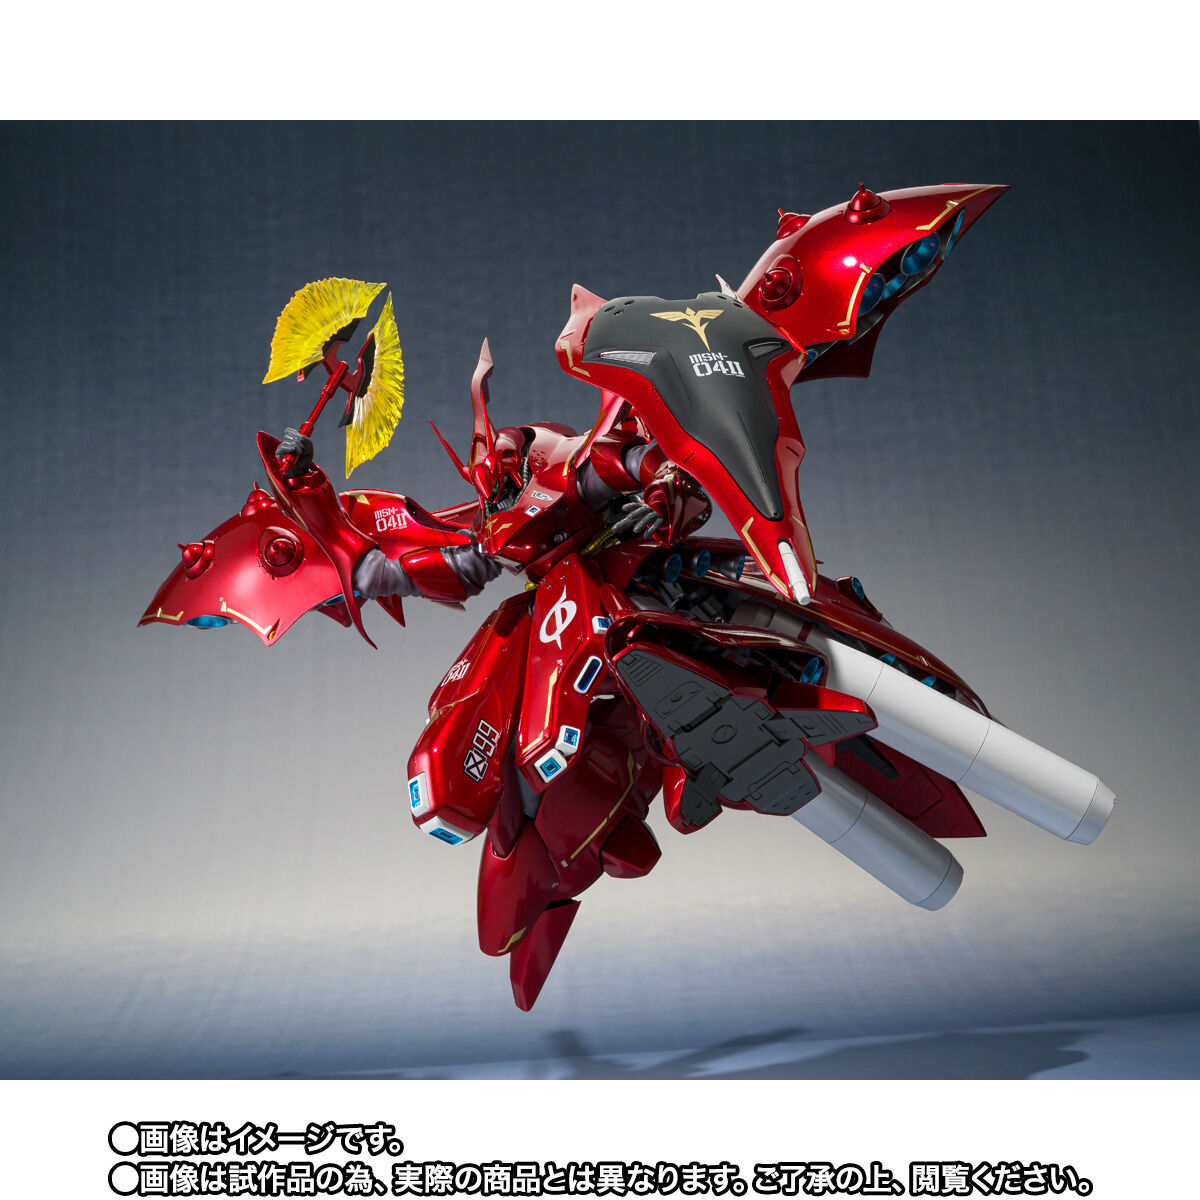 ROBOT魂 ＜SIDE MS＞ ナイチンゲール ～CHAR’s SPECIAL COLOR～